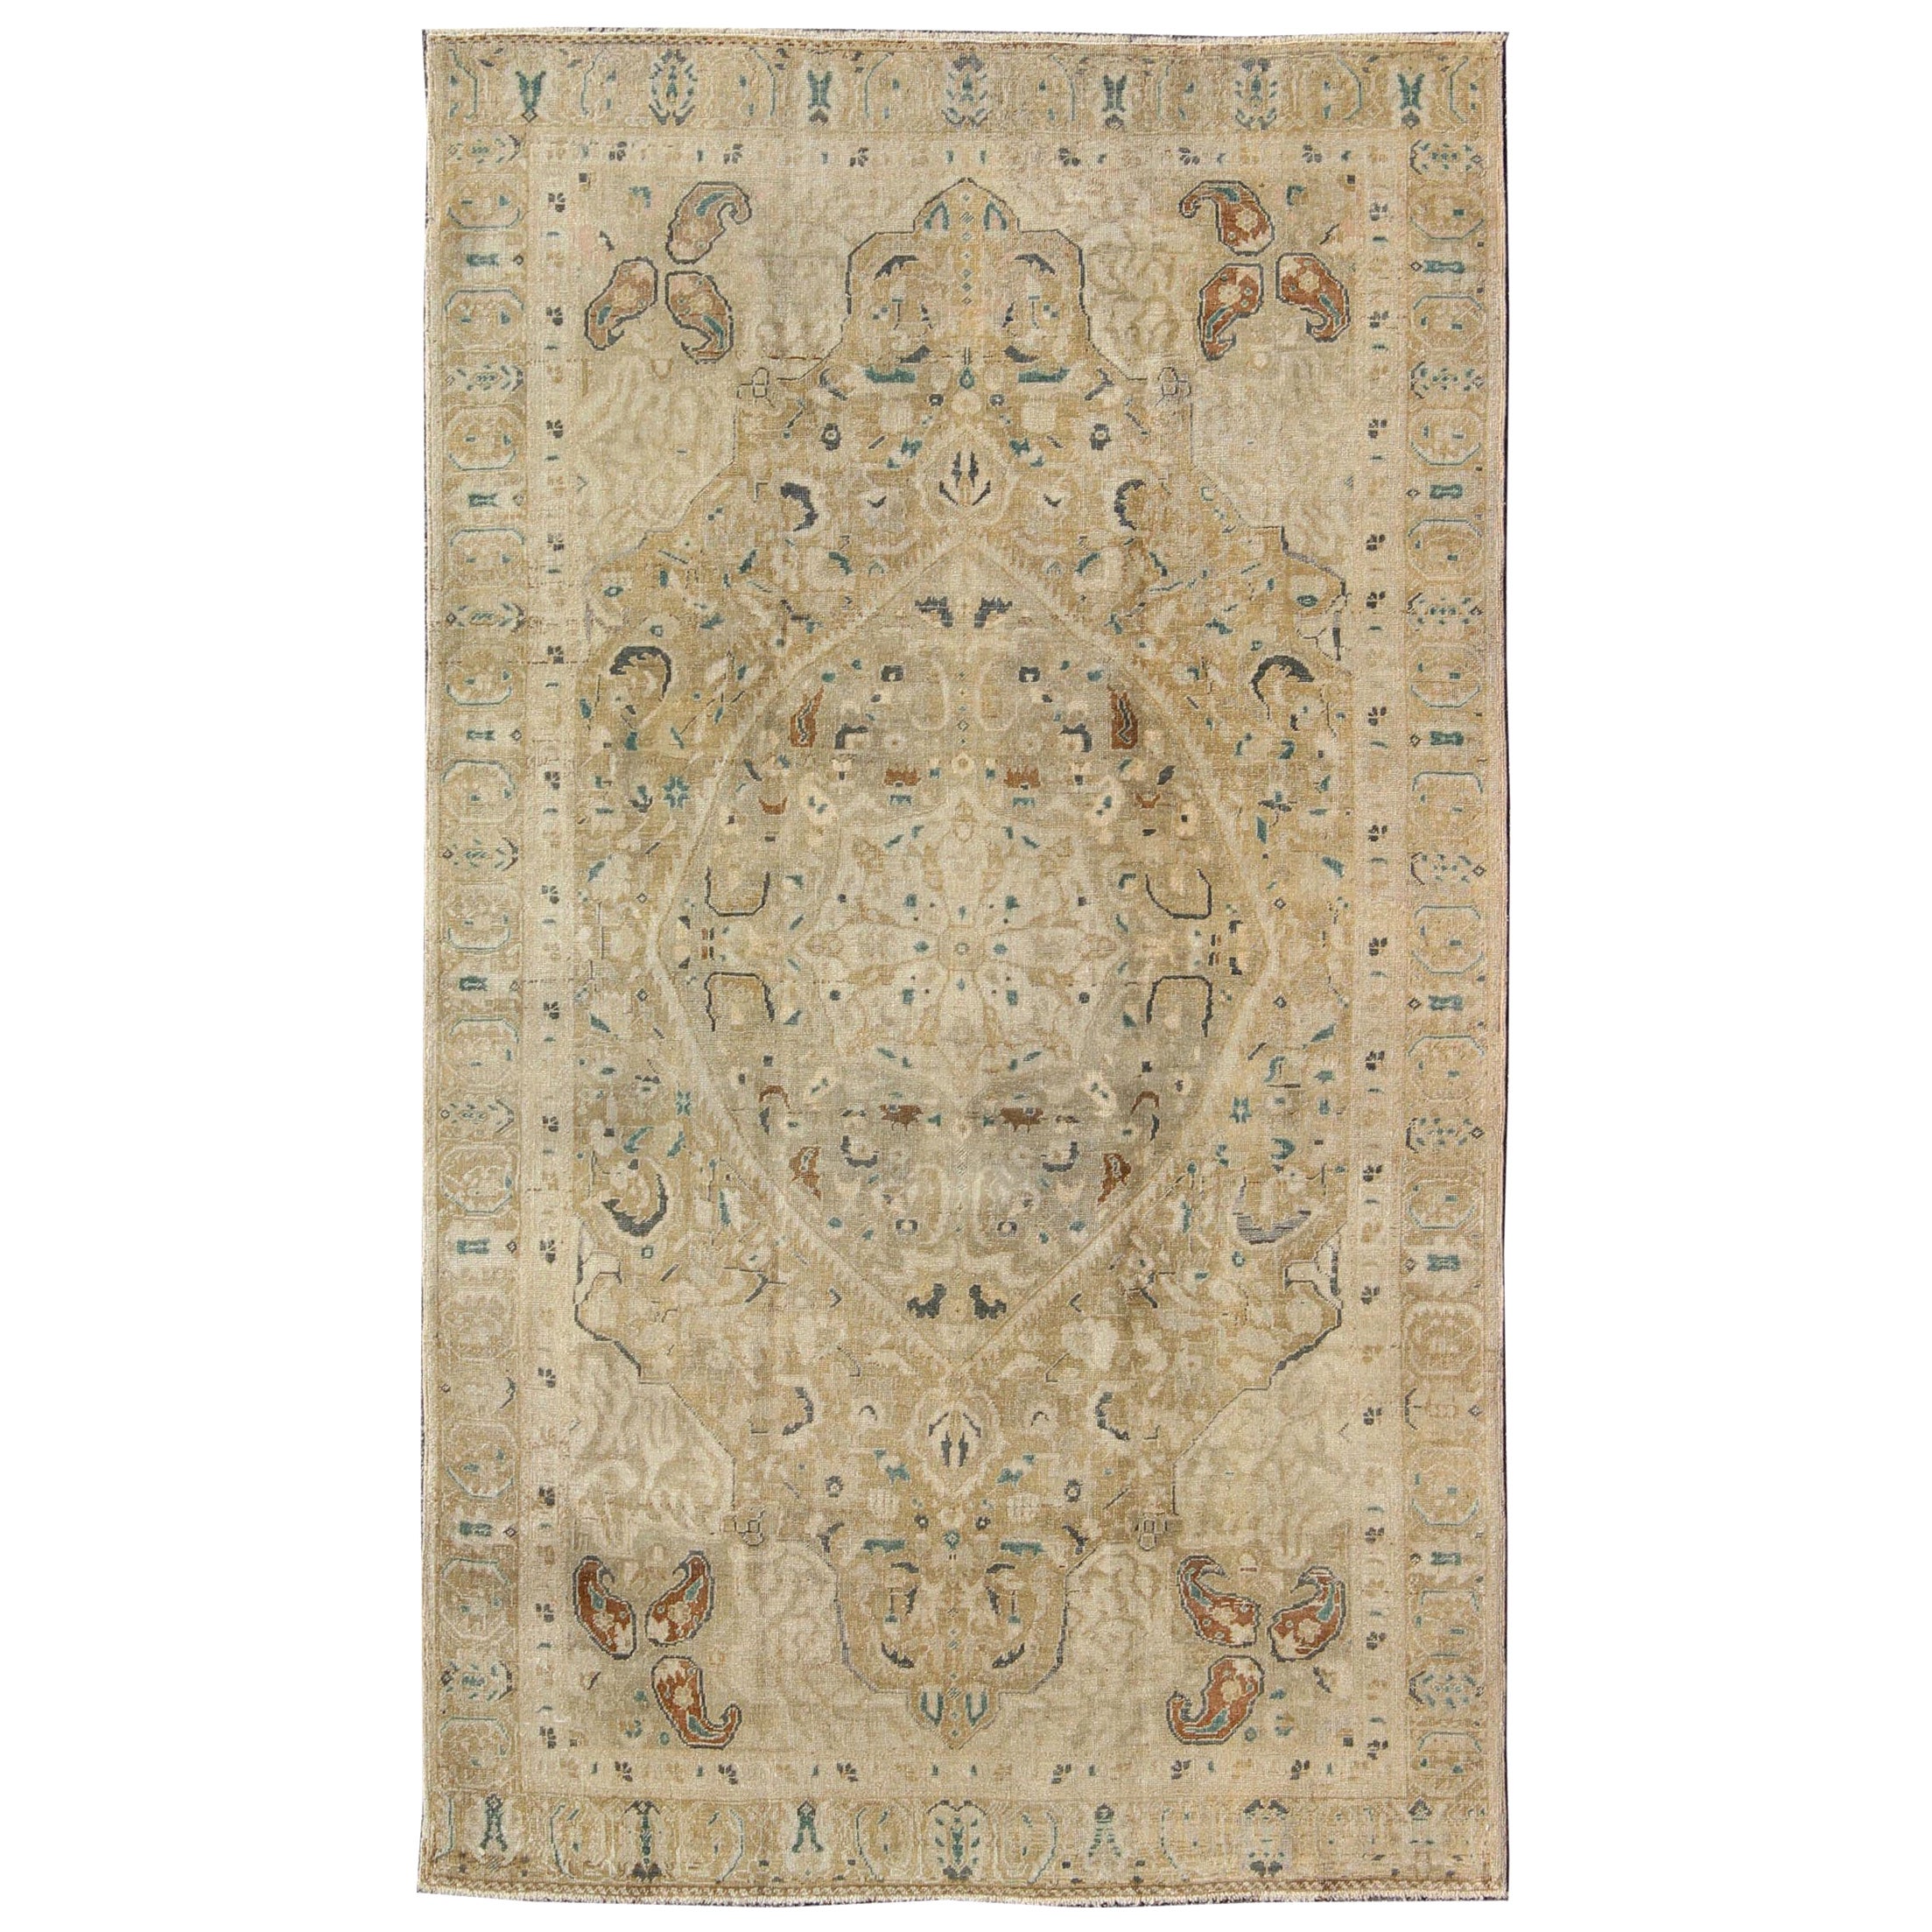 Very Fine Turkish Sivas Rug with Classic Design in Neutrals, Camel and Green